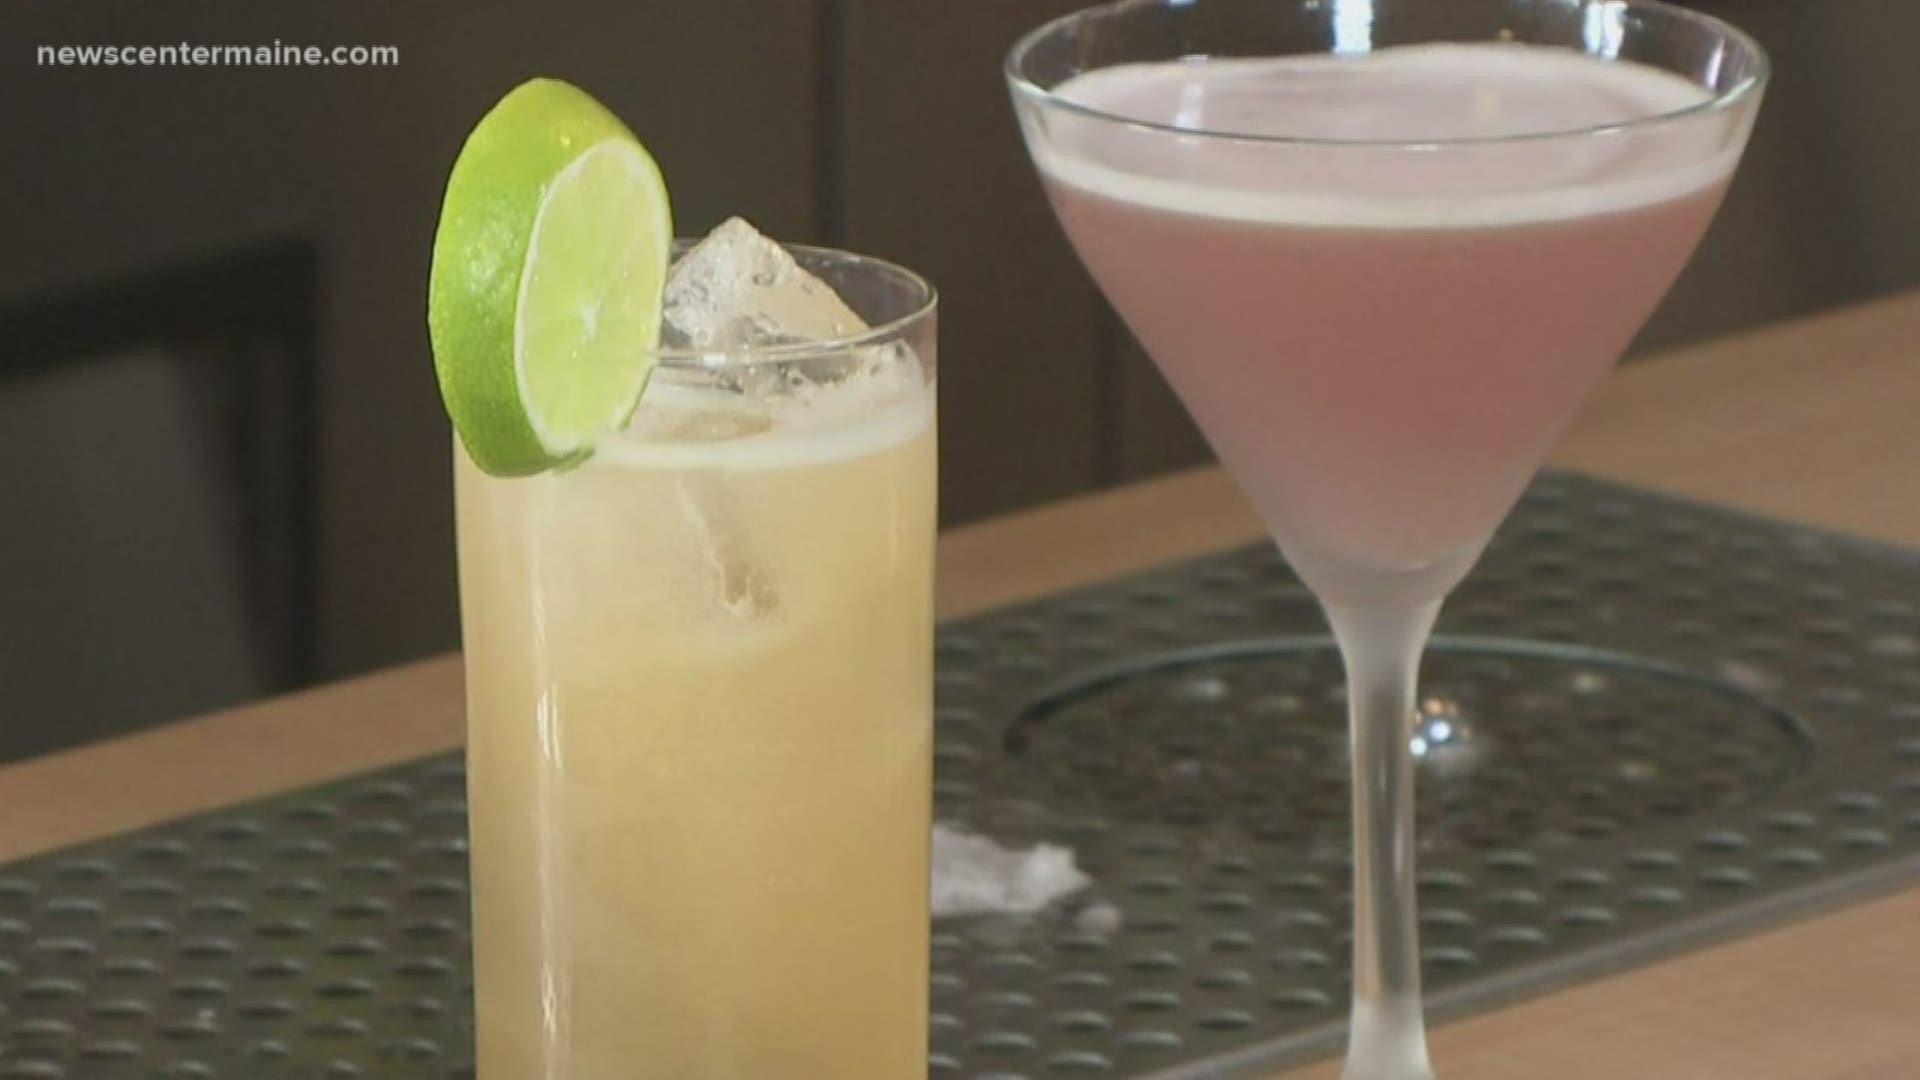 Andrew Volk from Hunt & Alpine, and Little Giant, demonstrates how to make these two Valentine's themed cocktails.